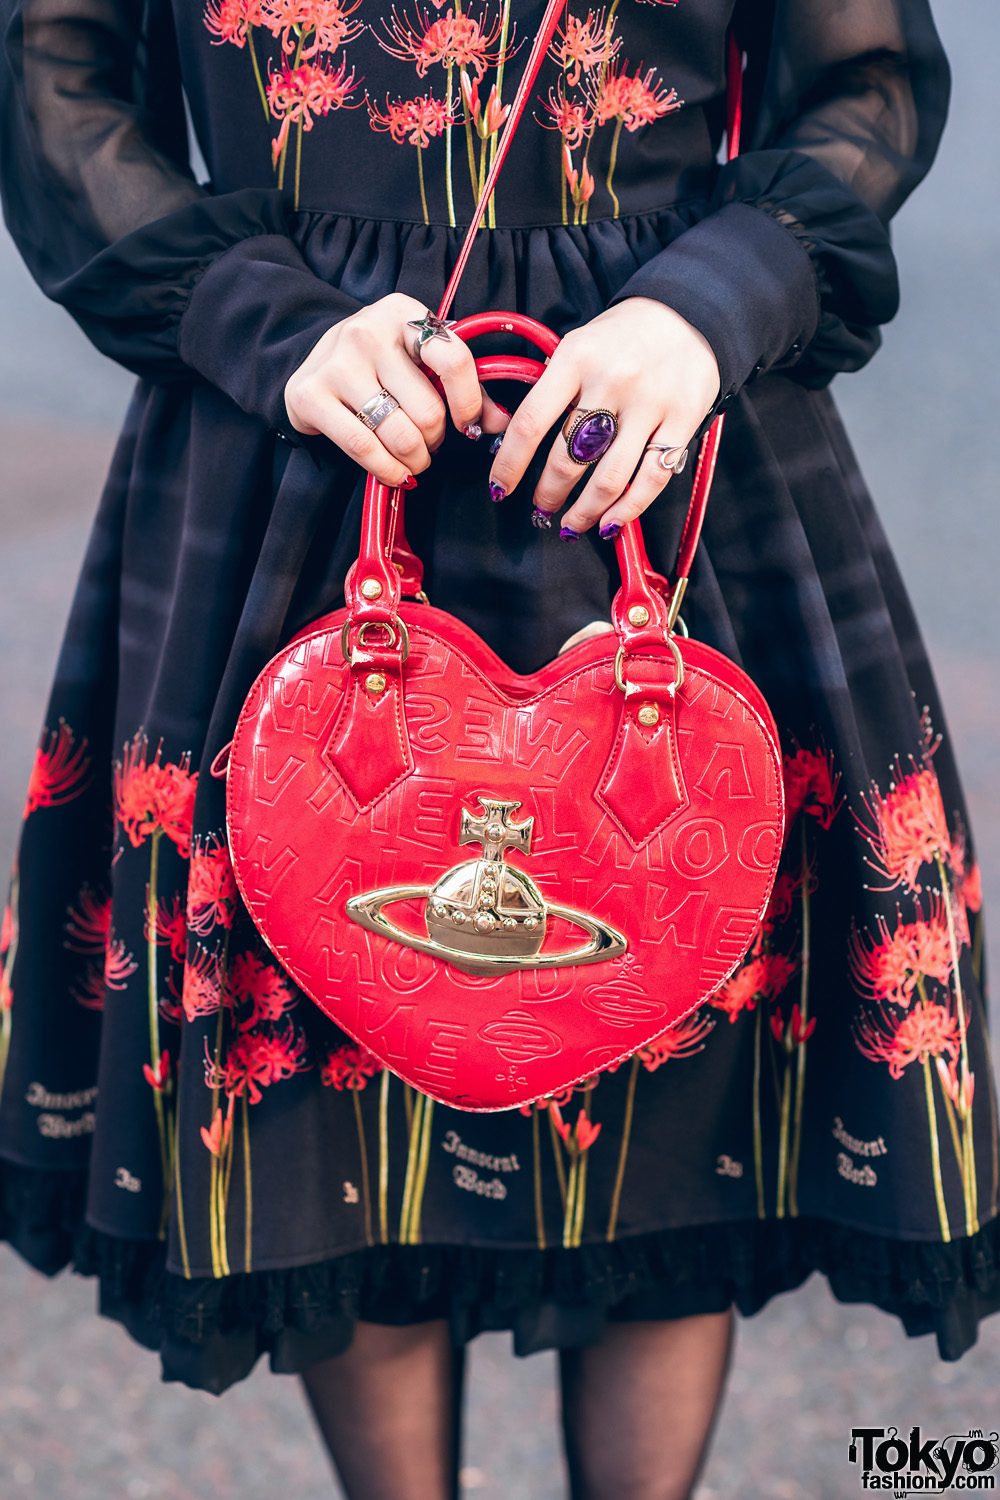 Vivienne Westwood's heart shaped 'Chancery' bags